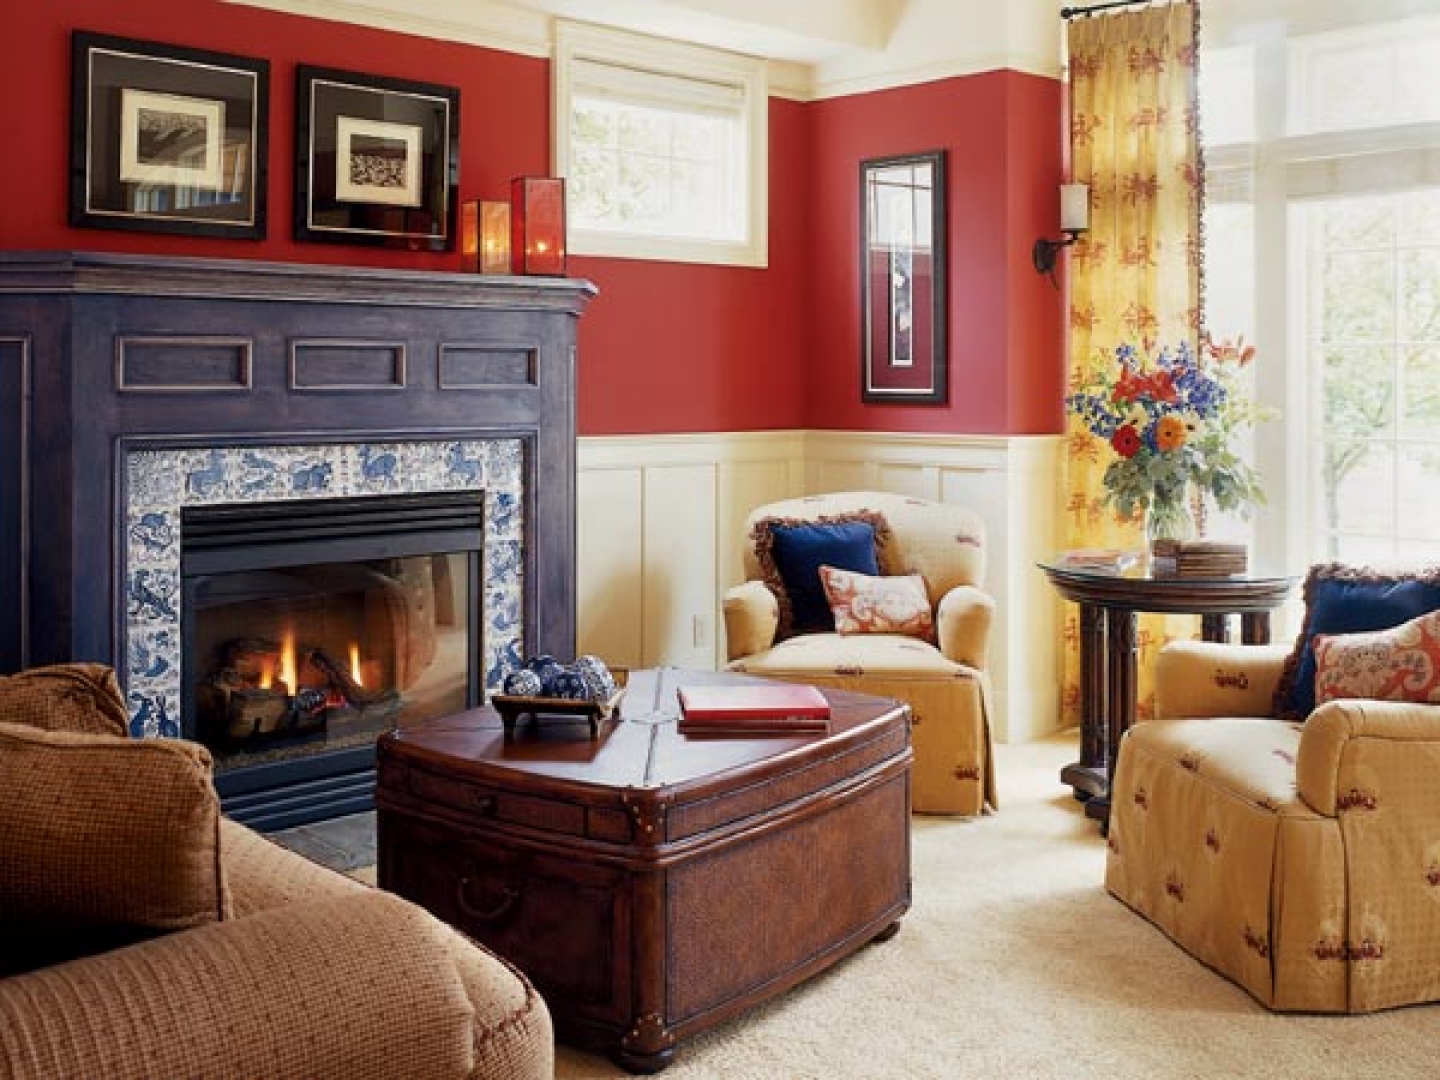 Small Living Room With Red Wall Decor Ideas